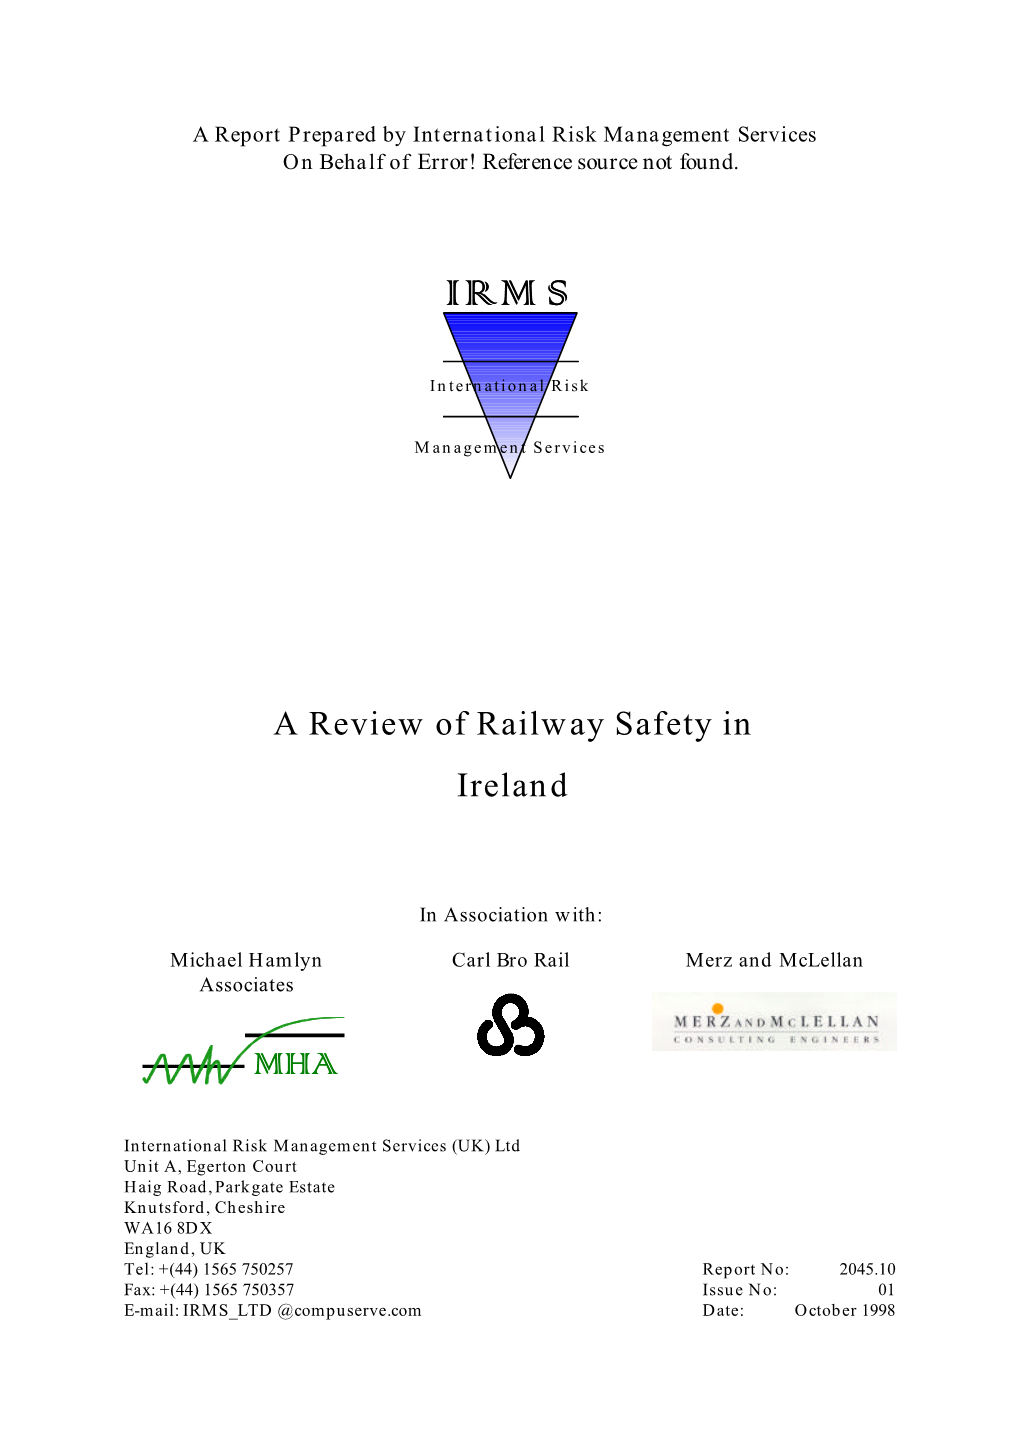 A Review of Railway Safety in Ireland